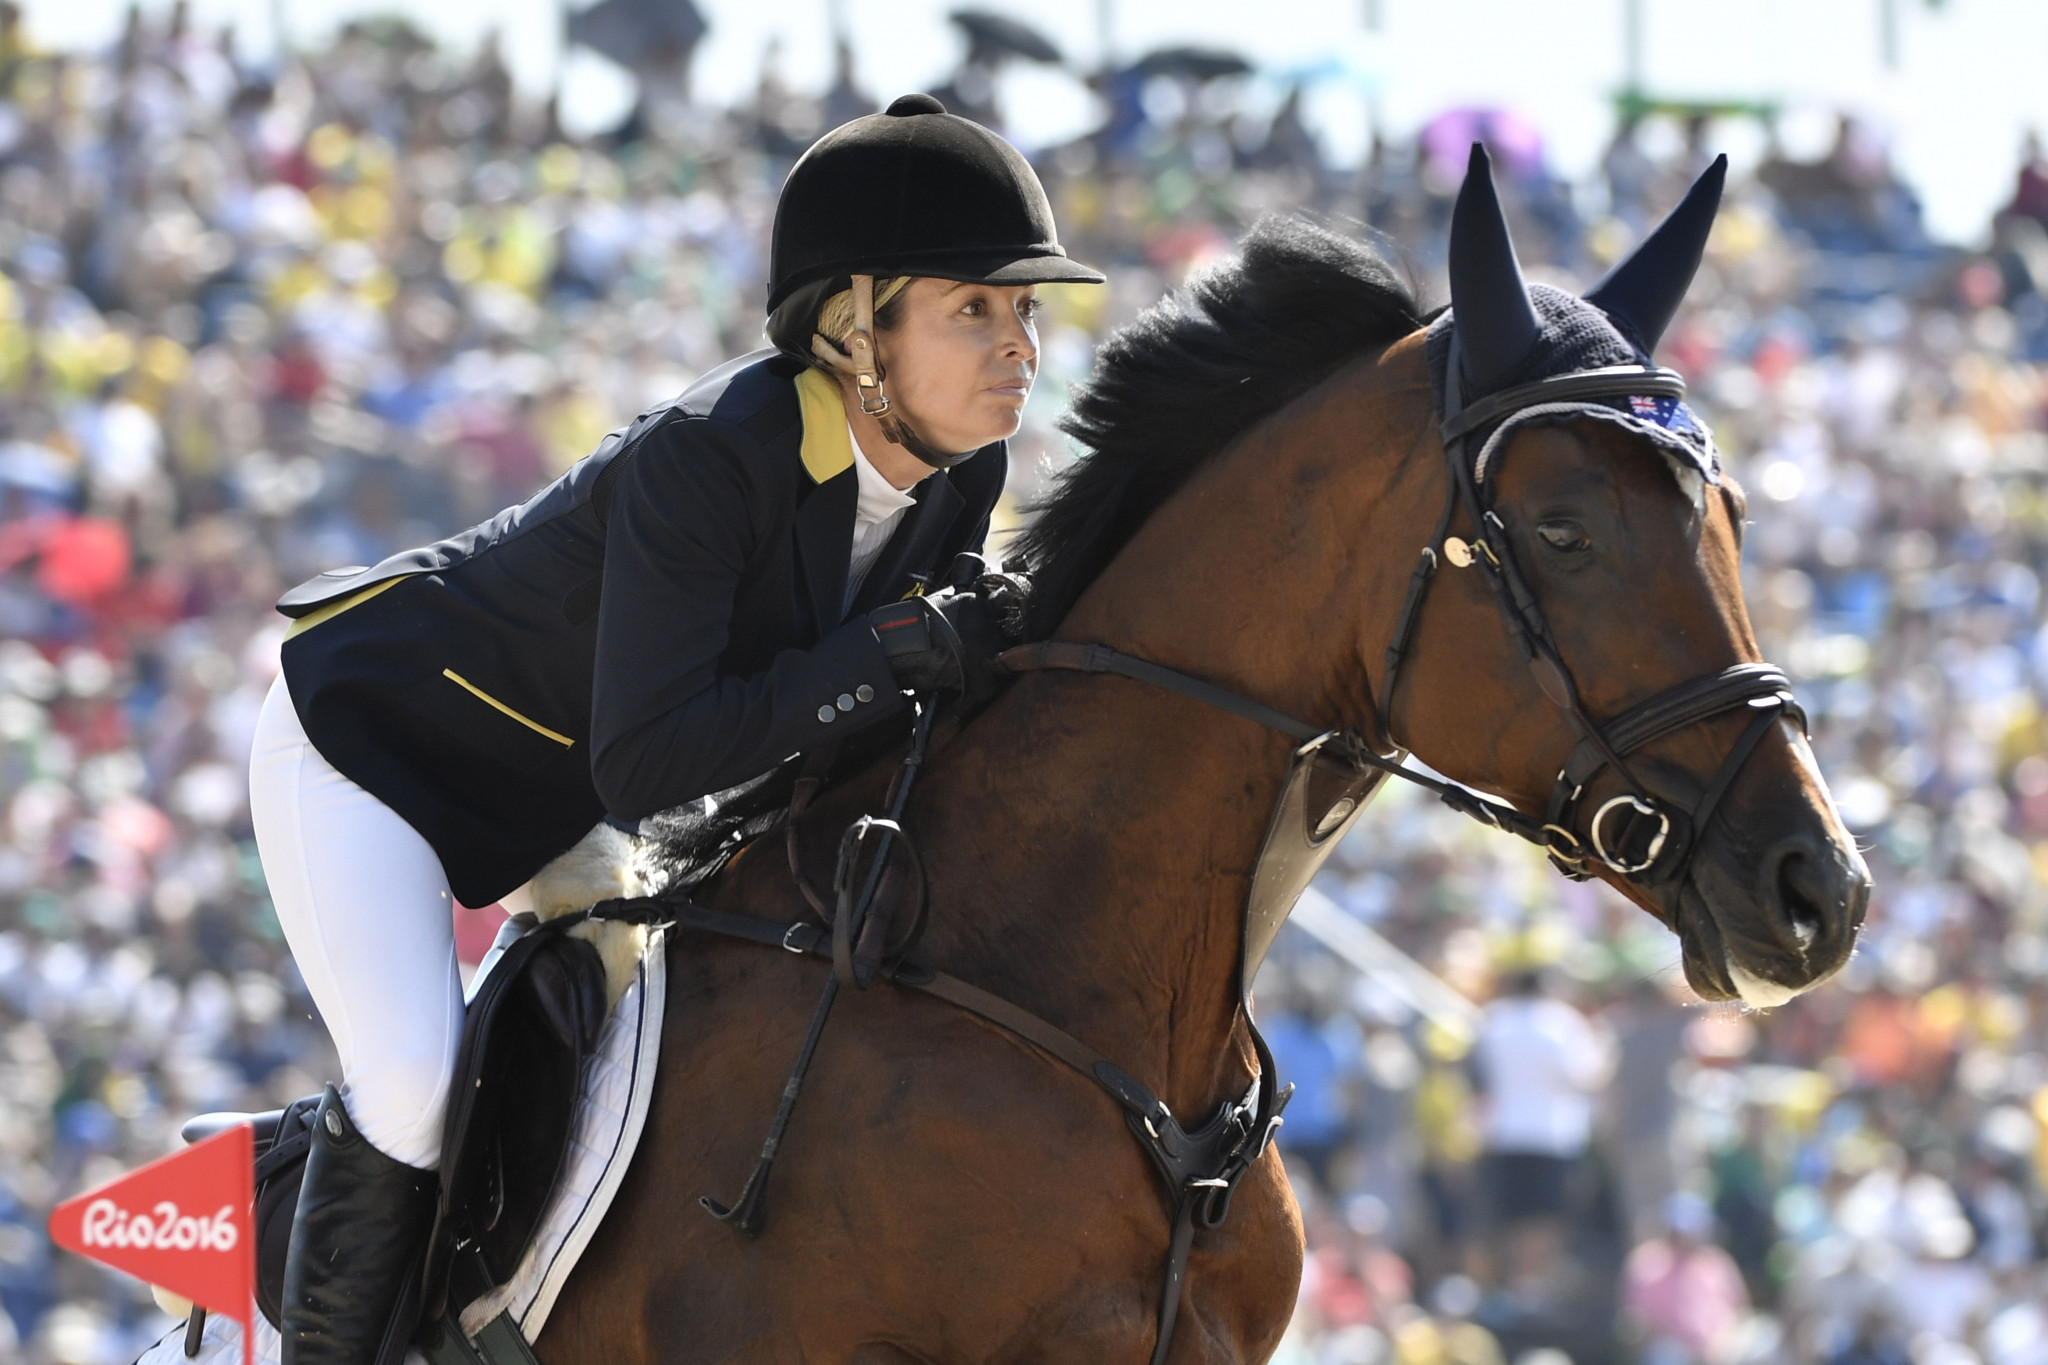 Edwina Tops-Alexander is the current overall leader ©Getty Images